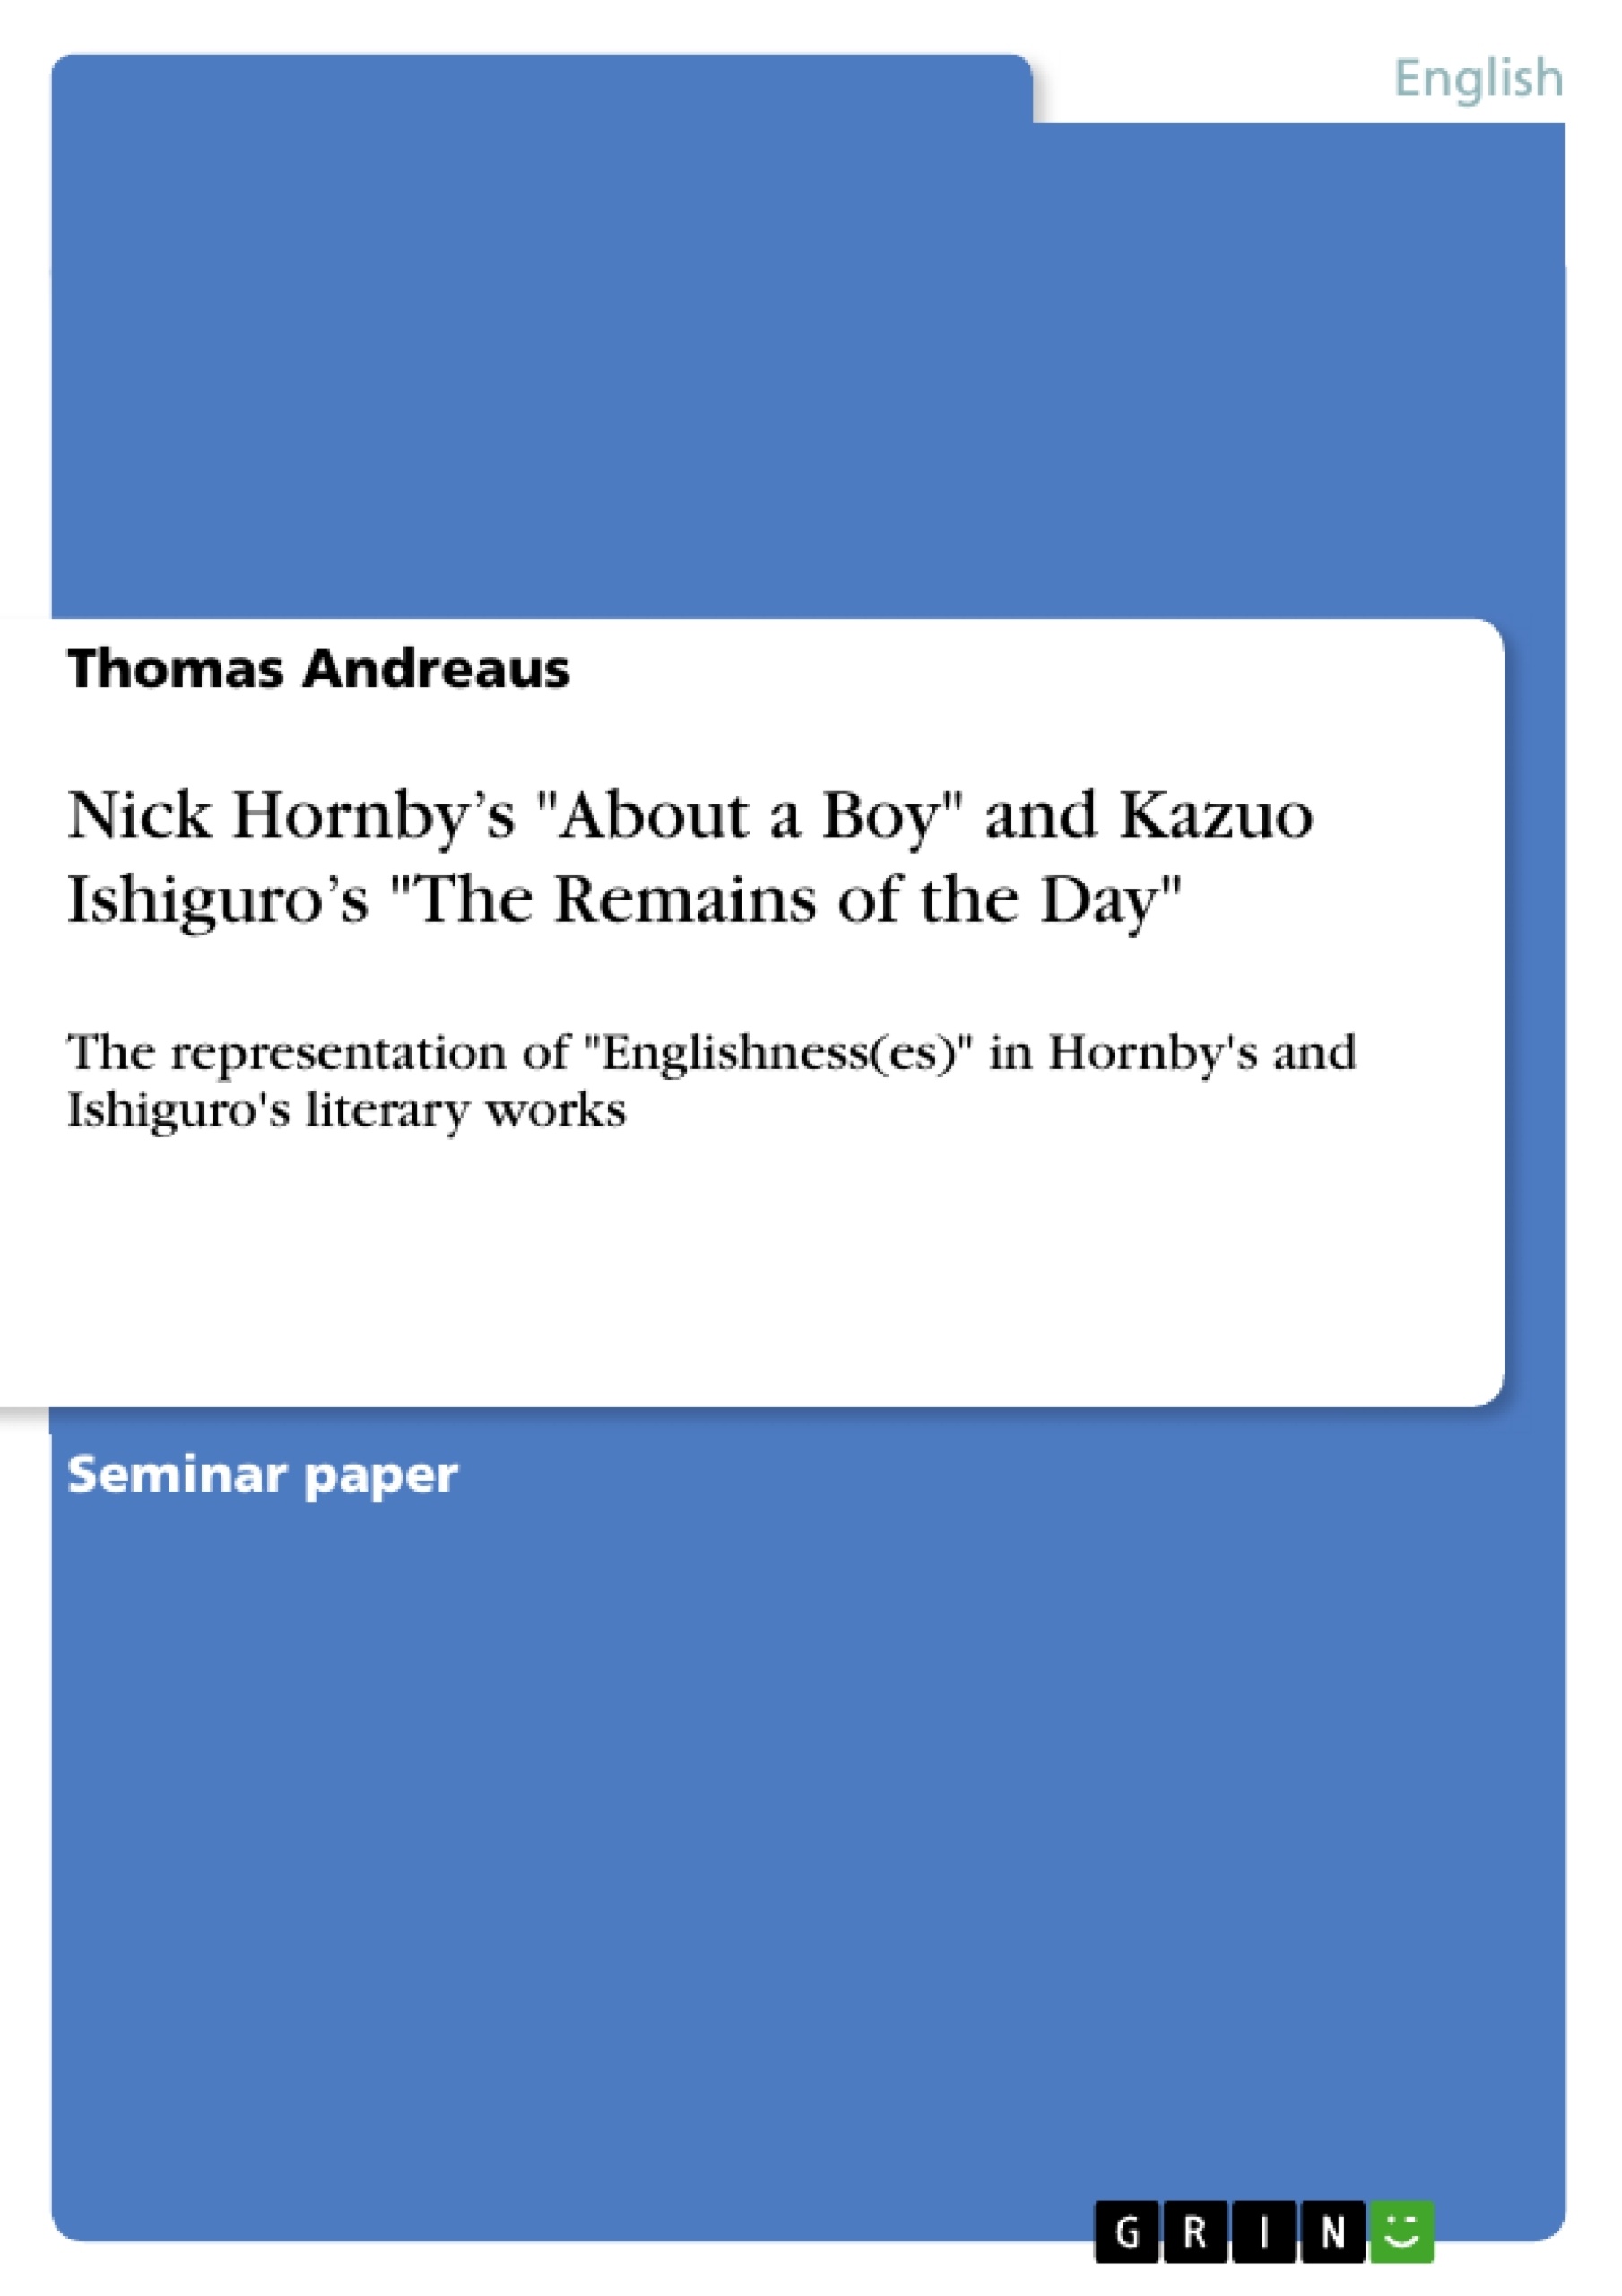 Title: Nick Hornby’s "About a Boy" and Kazuo Ishiguro’s "The Remains of the Day"